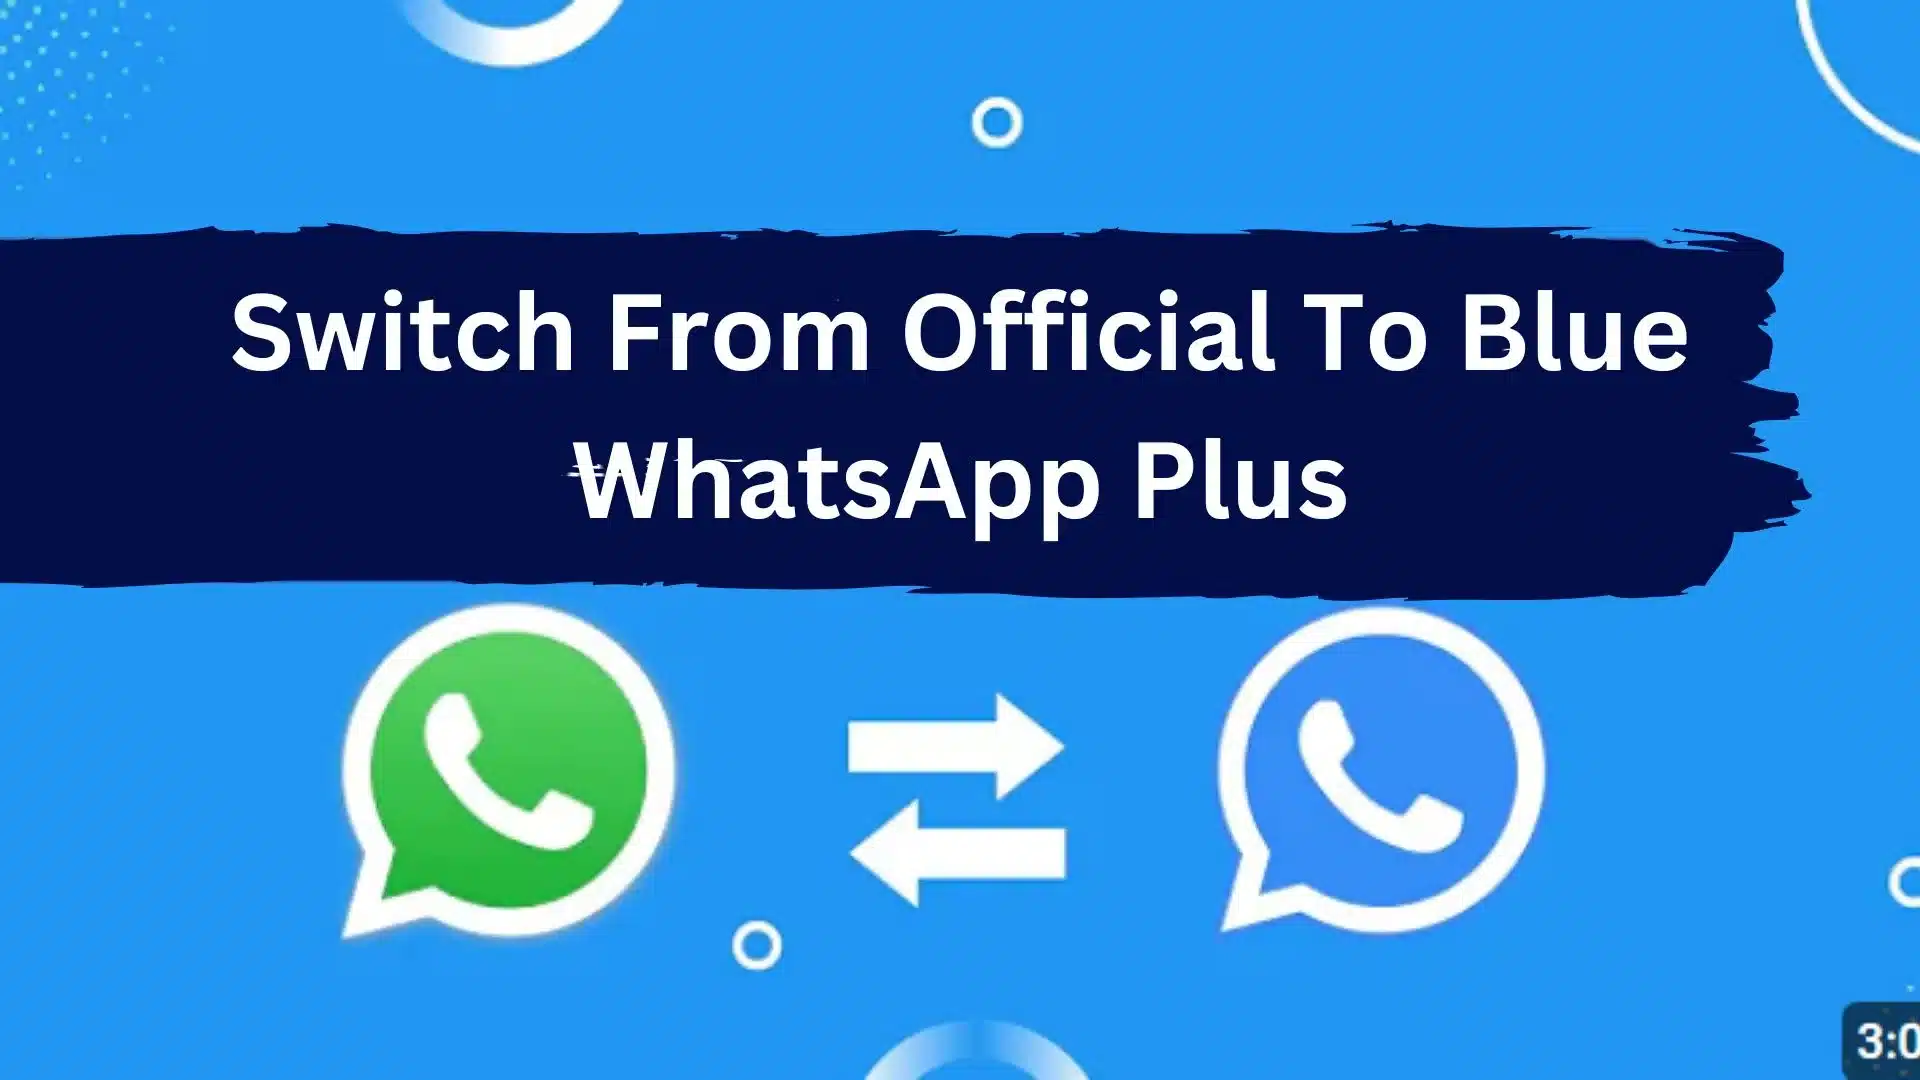 Switching from official to blue whatsapp